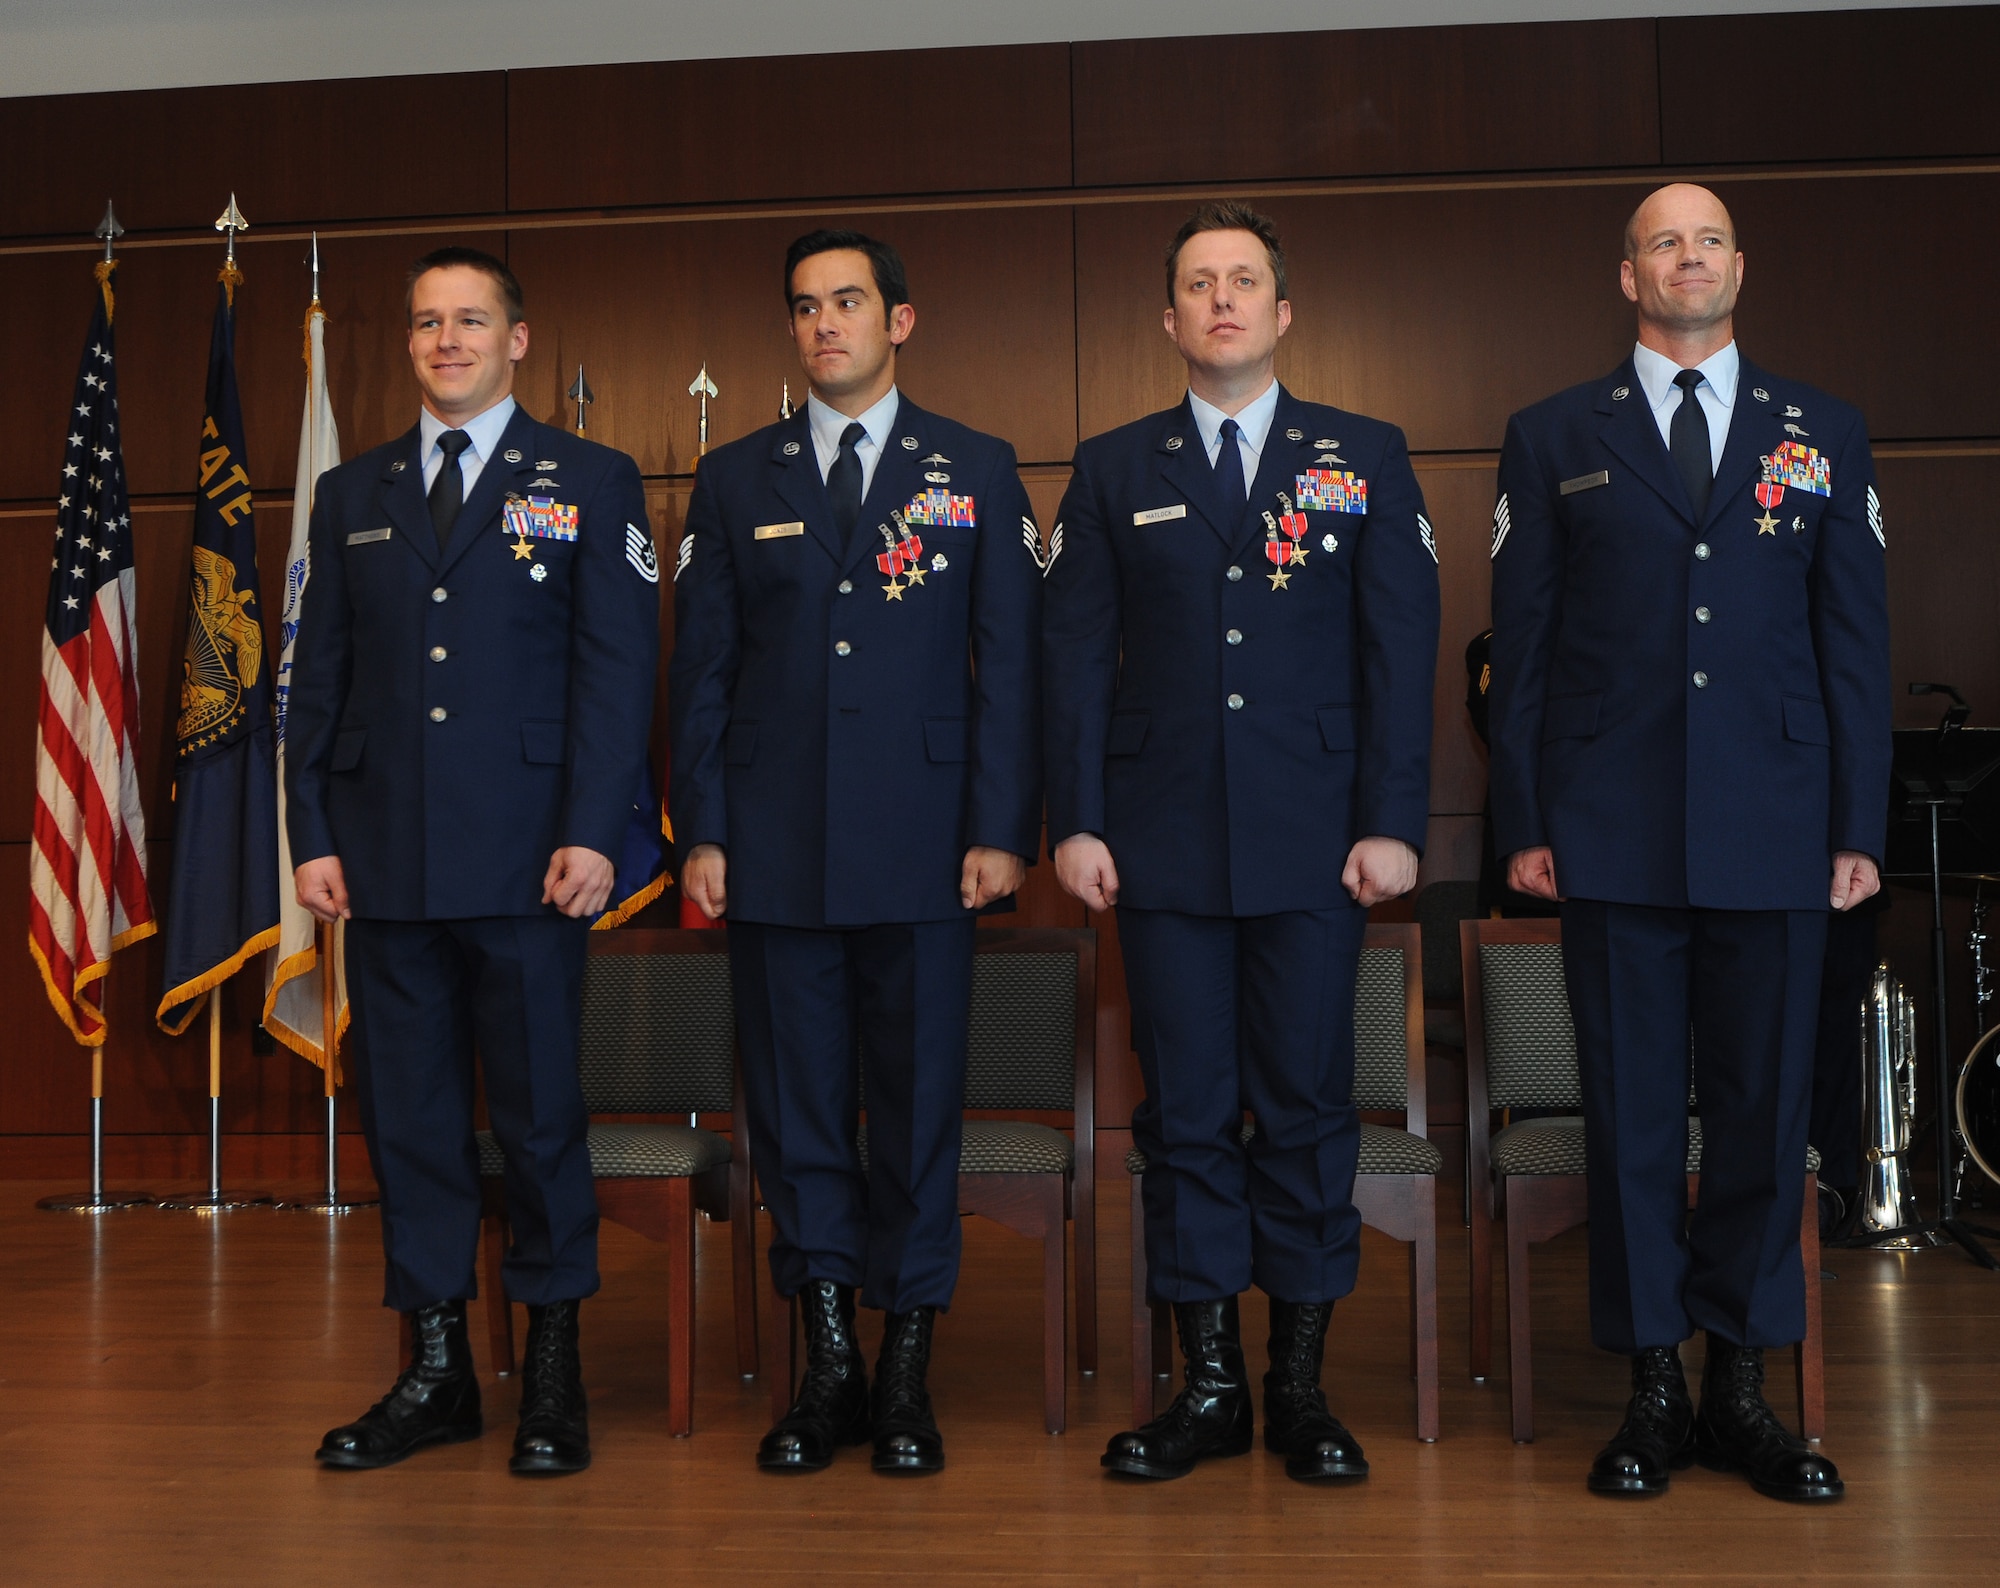 Combat controllers with the Oregon Air National Guard's 125th Special Tactics Squadron gather for a group photo following an award ceremony, March 24, 2014, at the 41st Infantry Division Armed Forces Reserve Center at Camp Withycombe, in Clackamas, Ore. From left: Tech. Sgt. Doug Matthews received the rarely awarded Silver Star; Staff Sgt. Christopher Jones received the Bronze Star with Valor and first Oak Leaf Cluster; Staff Sgt. Matthew Matlock received the Bronze Star Medal with Valor and second Oak Leaf Cluster; and Tech. Sgt. George Thompson received the Bronze Star. (U.S. Air National Guard photo by Tech. Sgt. John Hughel, 142nd Fighter Wing Public Affairs/Released) 